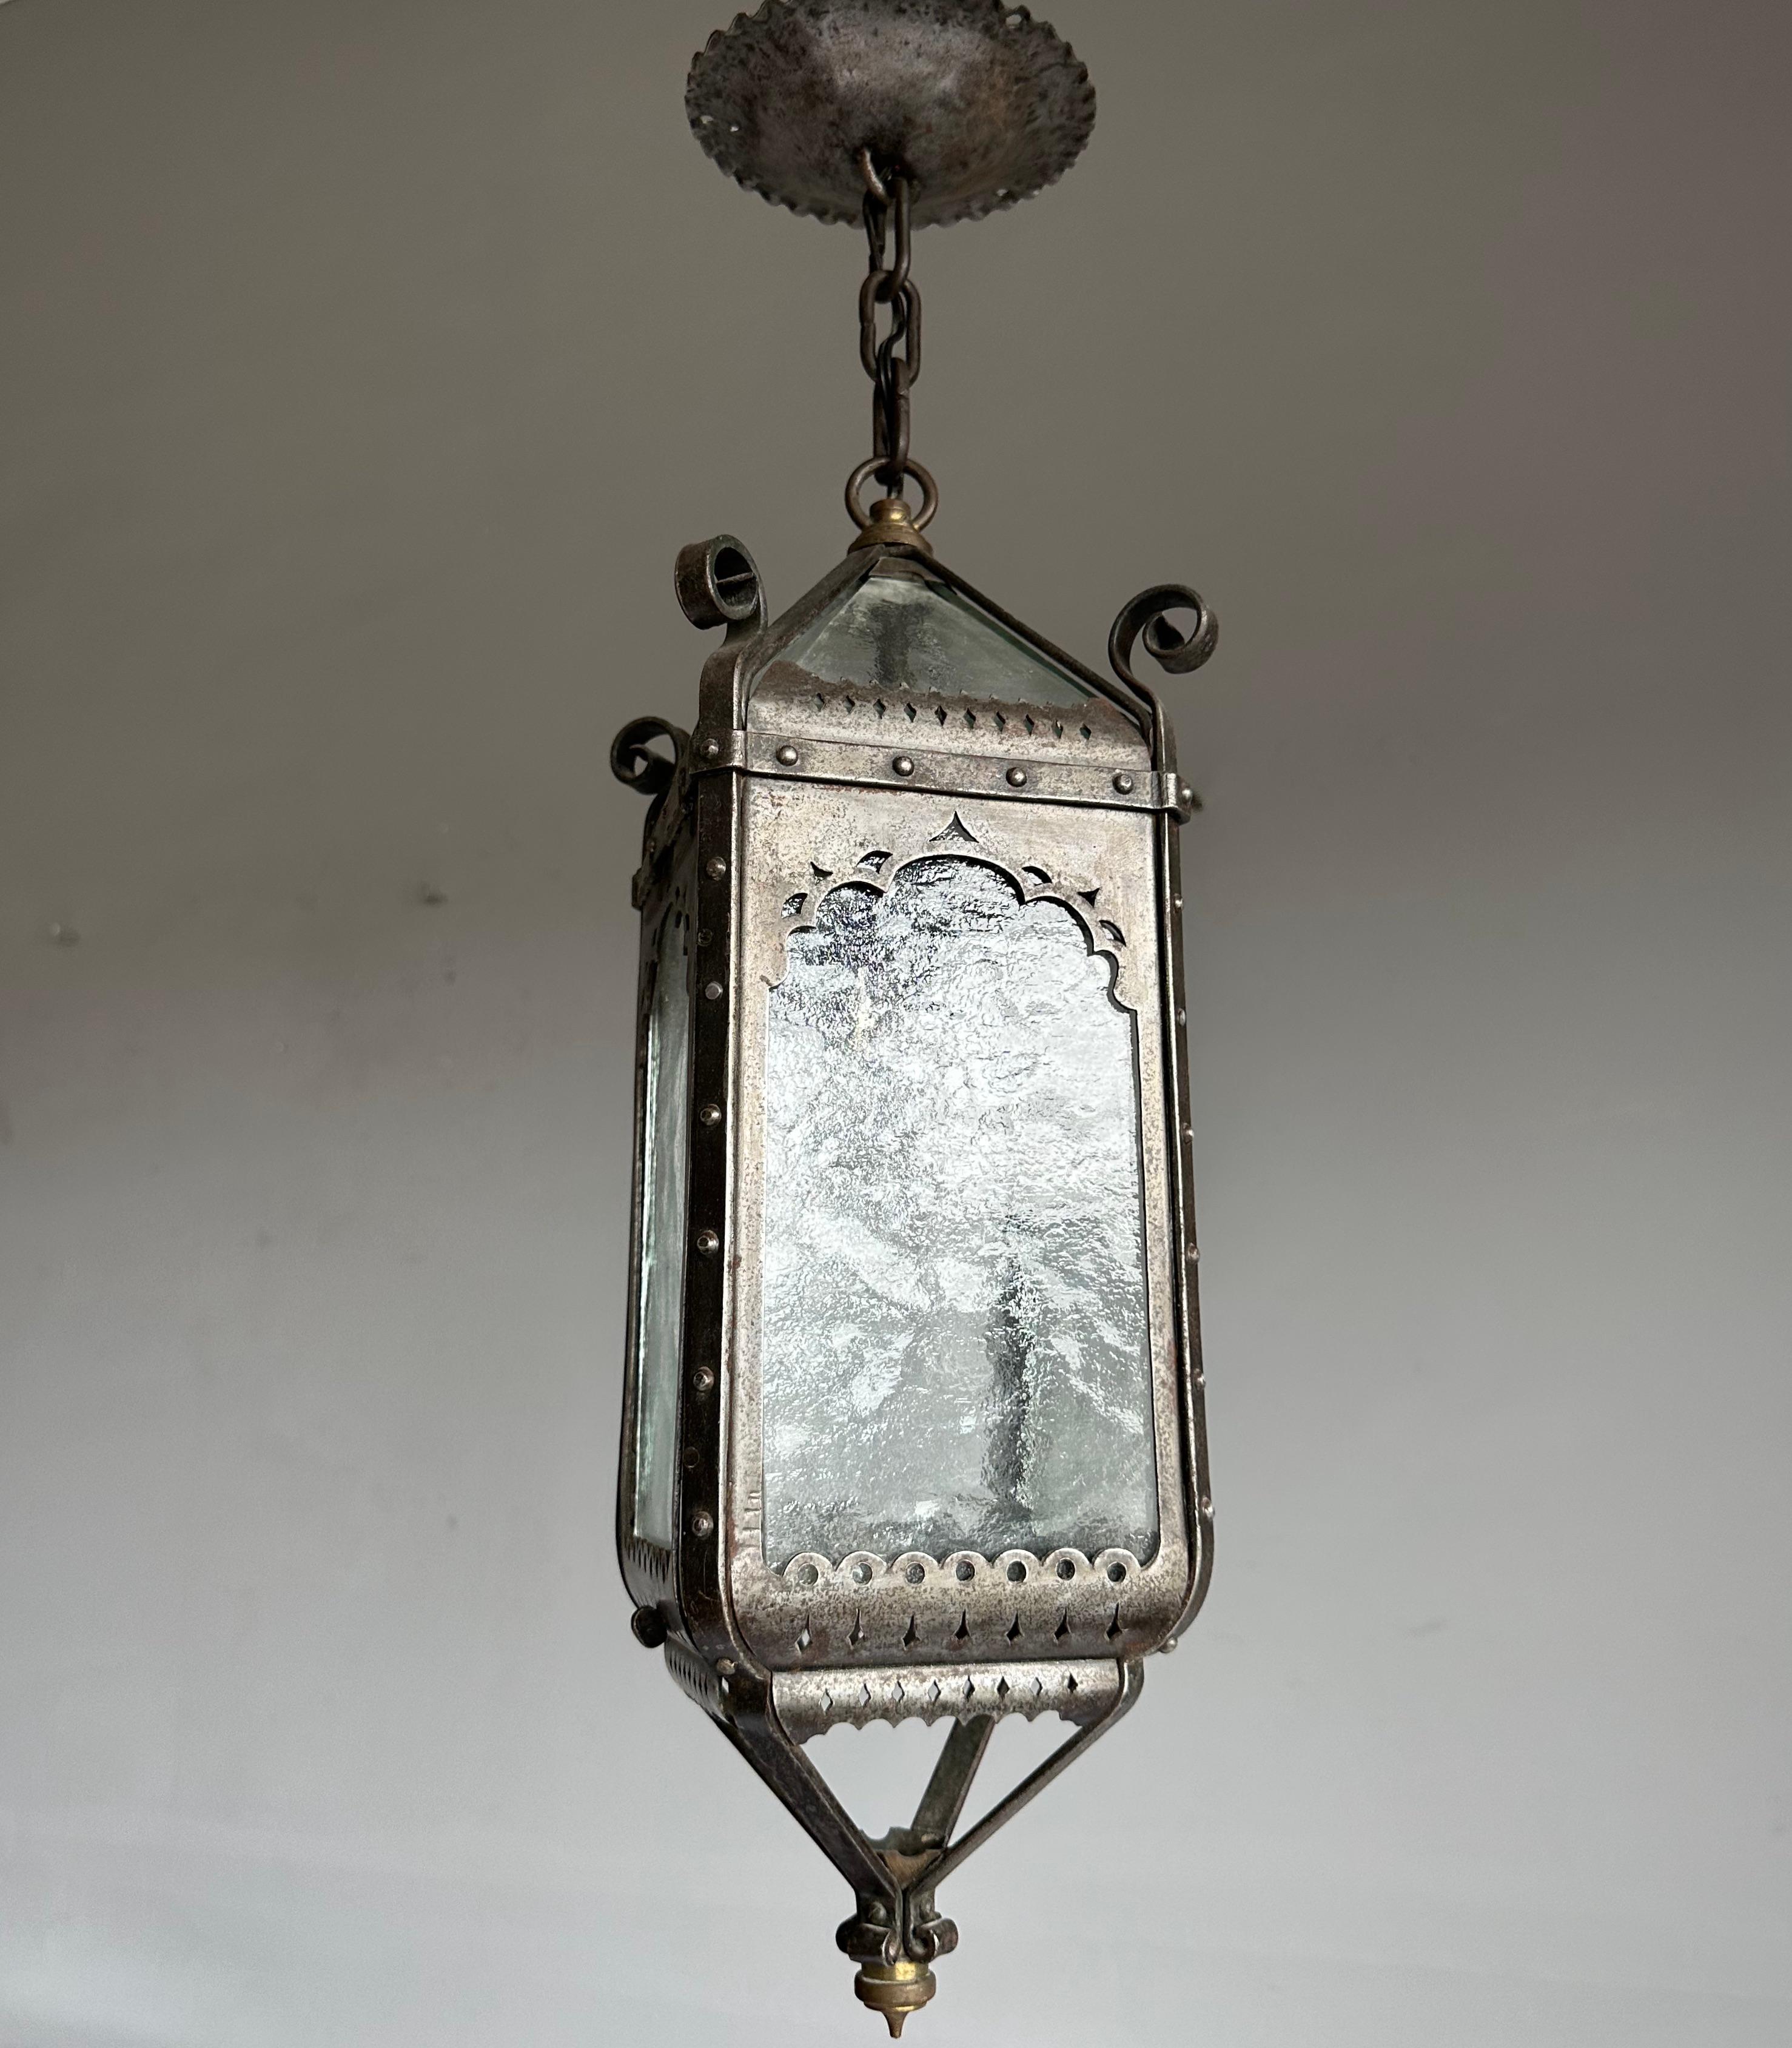 Finer quality and all handcrafted, tall entry hall light fixture.

With early 20th century lighting as one of our specialities, we are always happy to find a pendant, lantern or chandelier that we have never seen before. This Medieval Style lantern